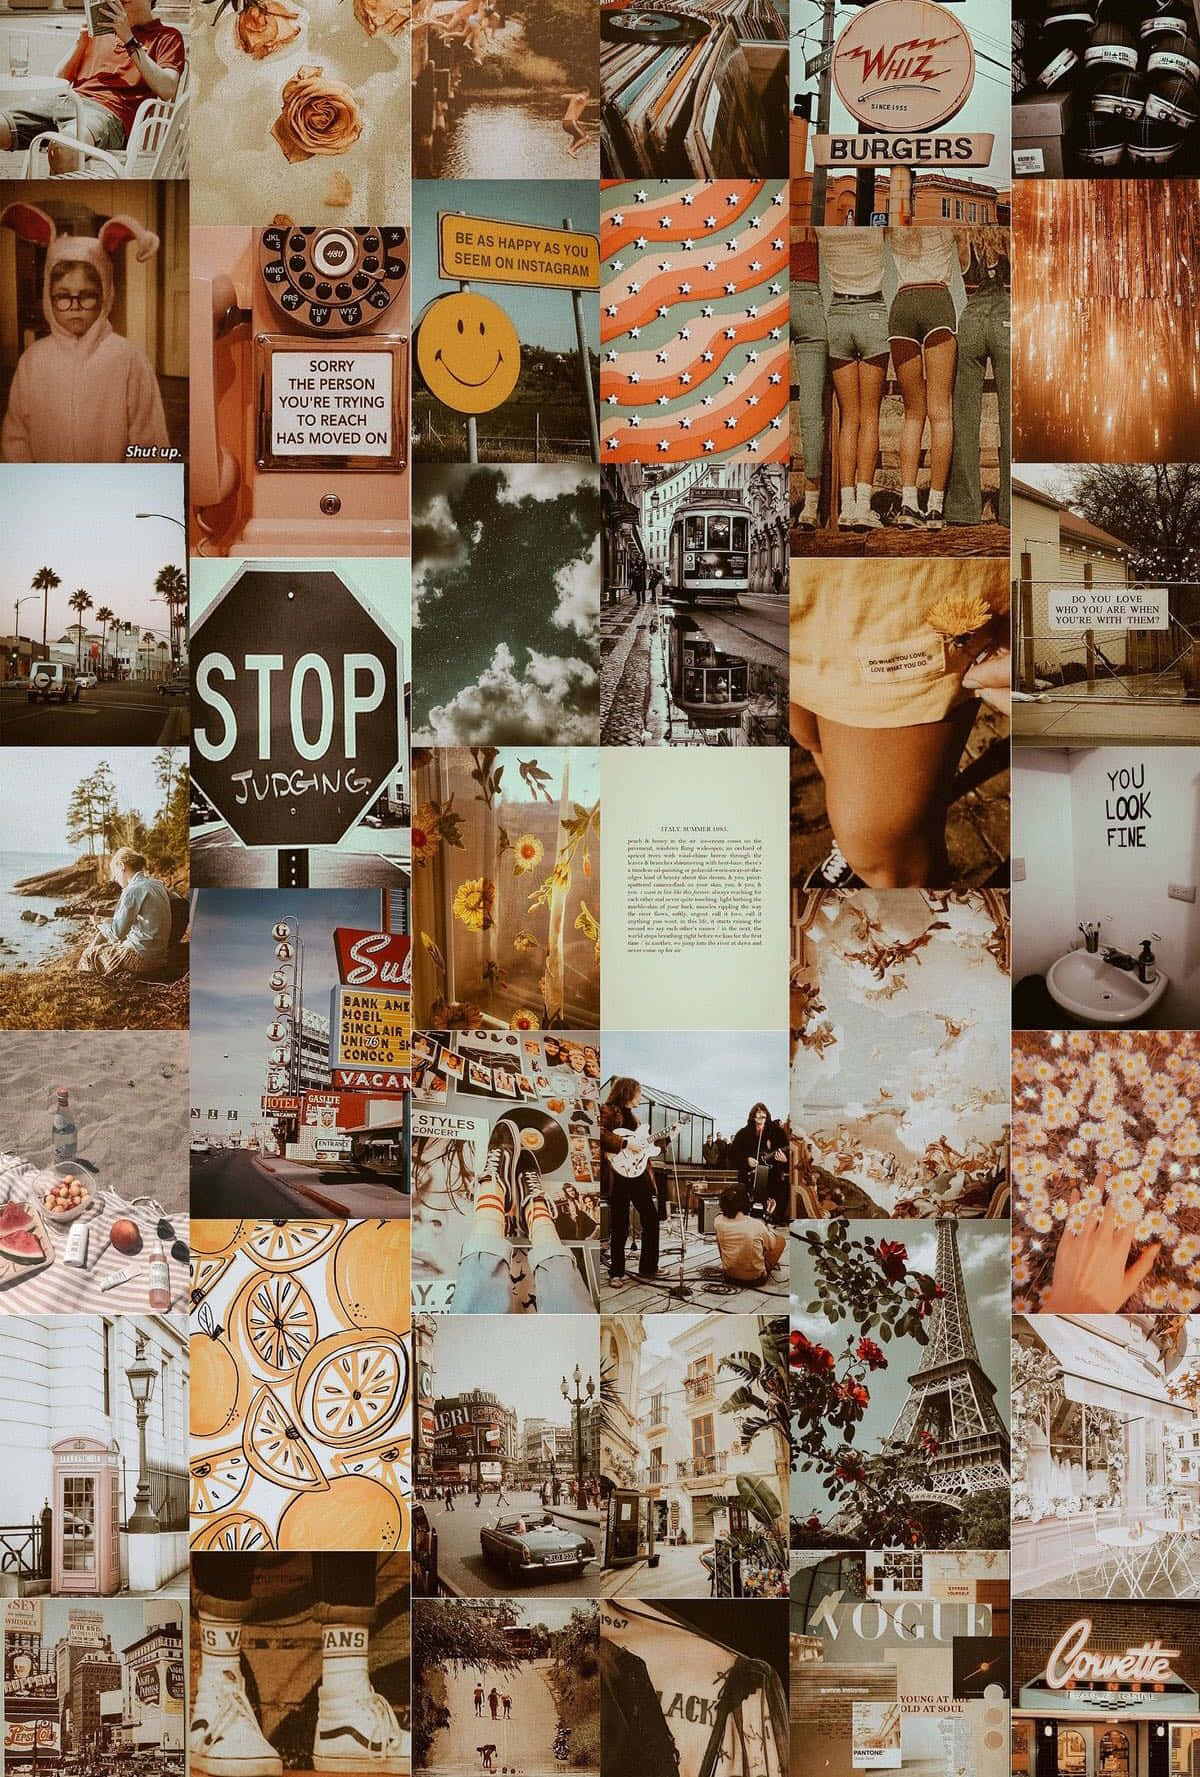 Funkyvintage Collage Can Be Translated Into Italian As 